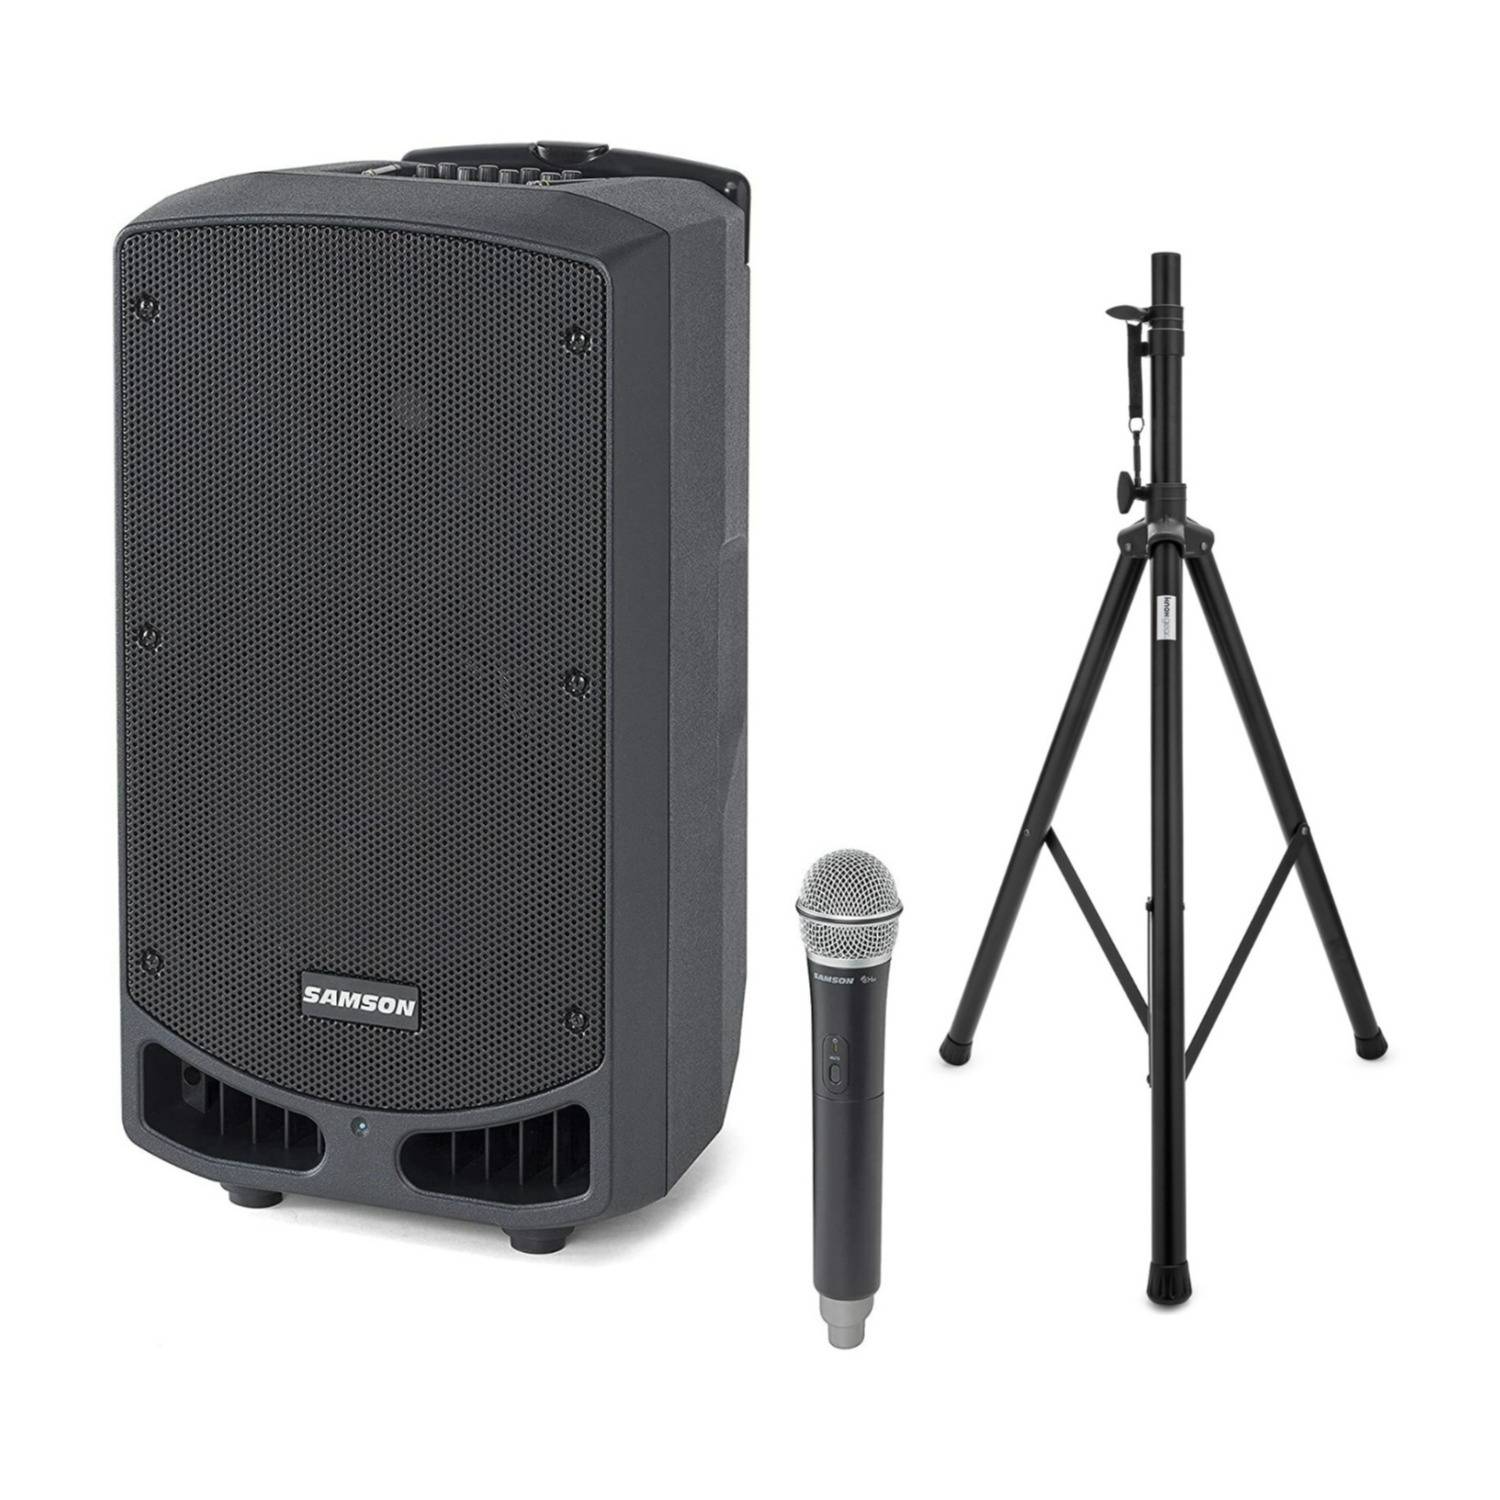 Samson Expedition XP310w Portable PA-10 Speaker with Handheld Wireless System Bundle